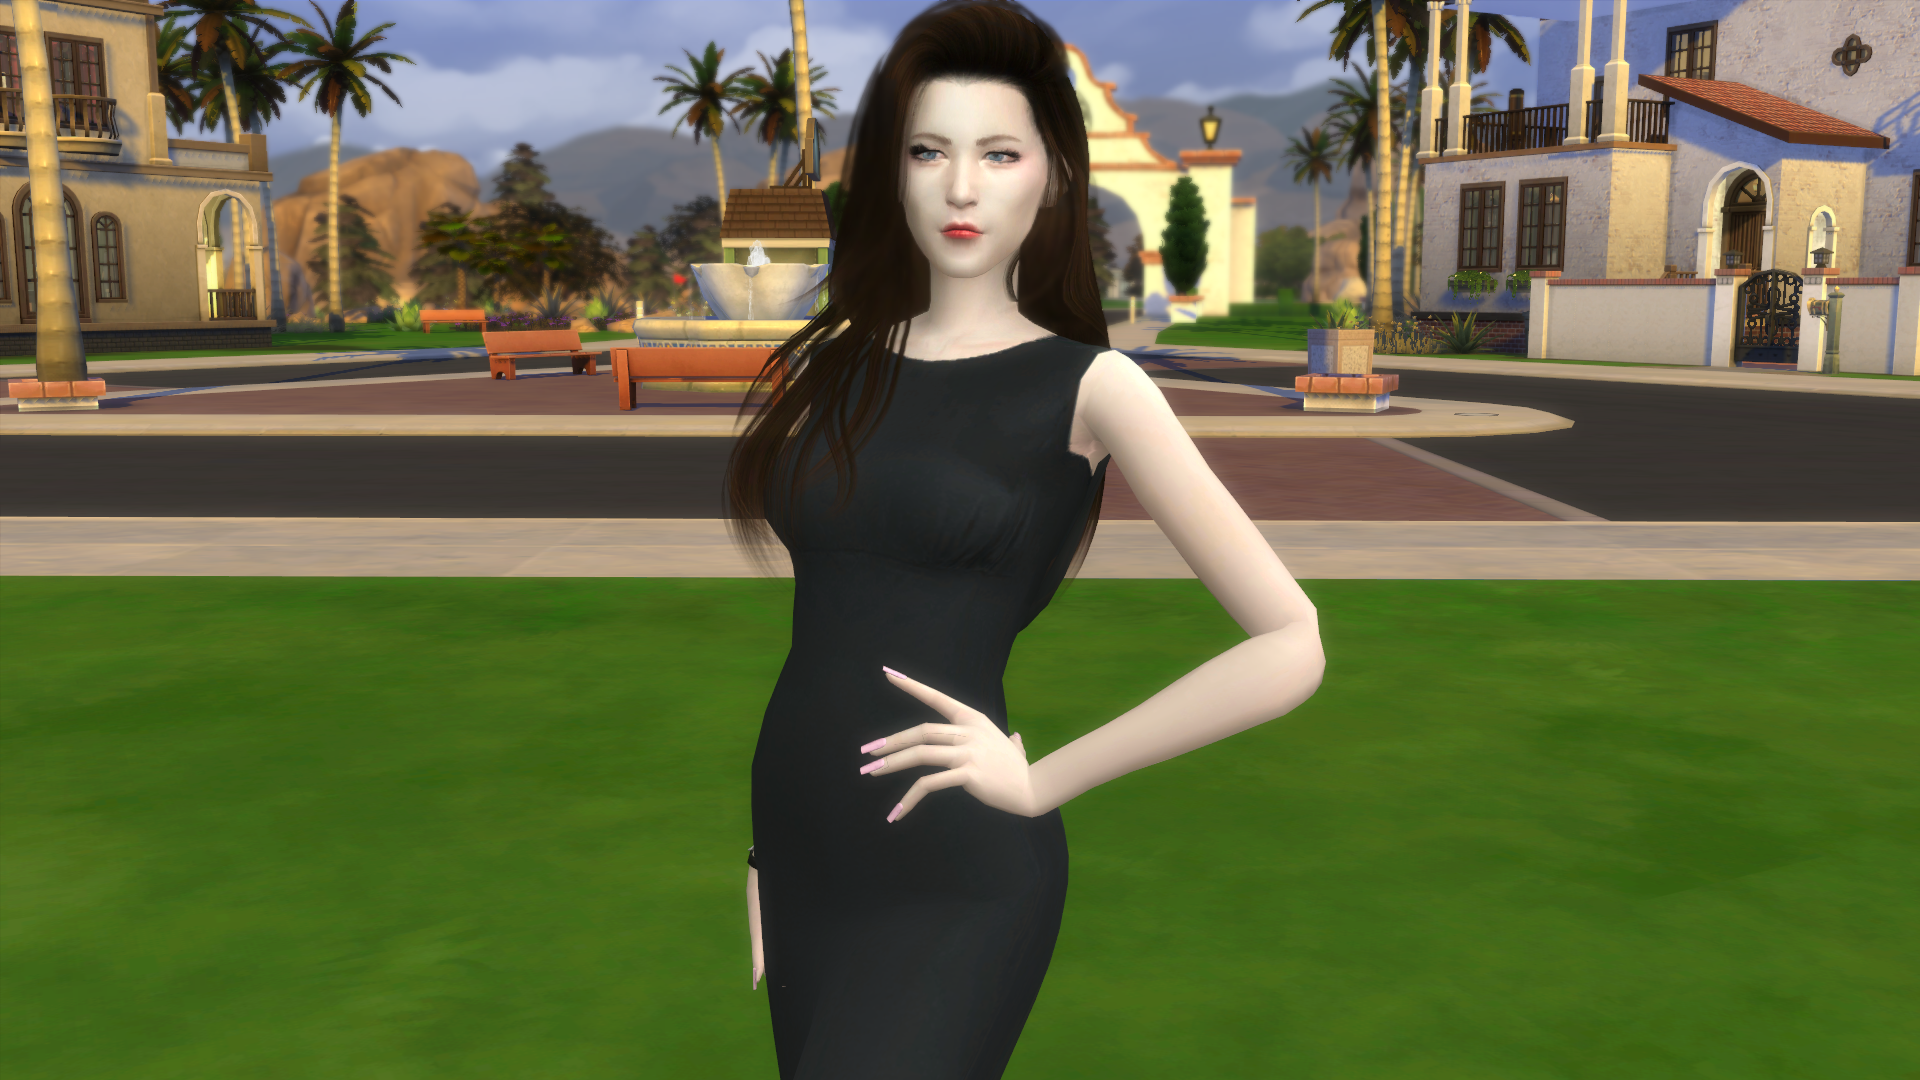 940736919_TheSims43_20_202110_32_12AM.png.41a46f63952abe16fcb30a65bd0b0d17.png